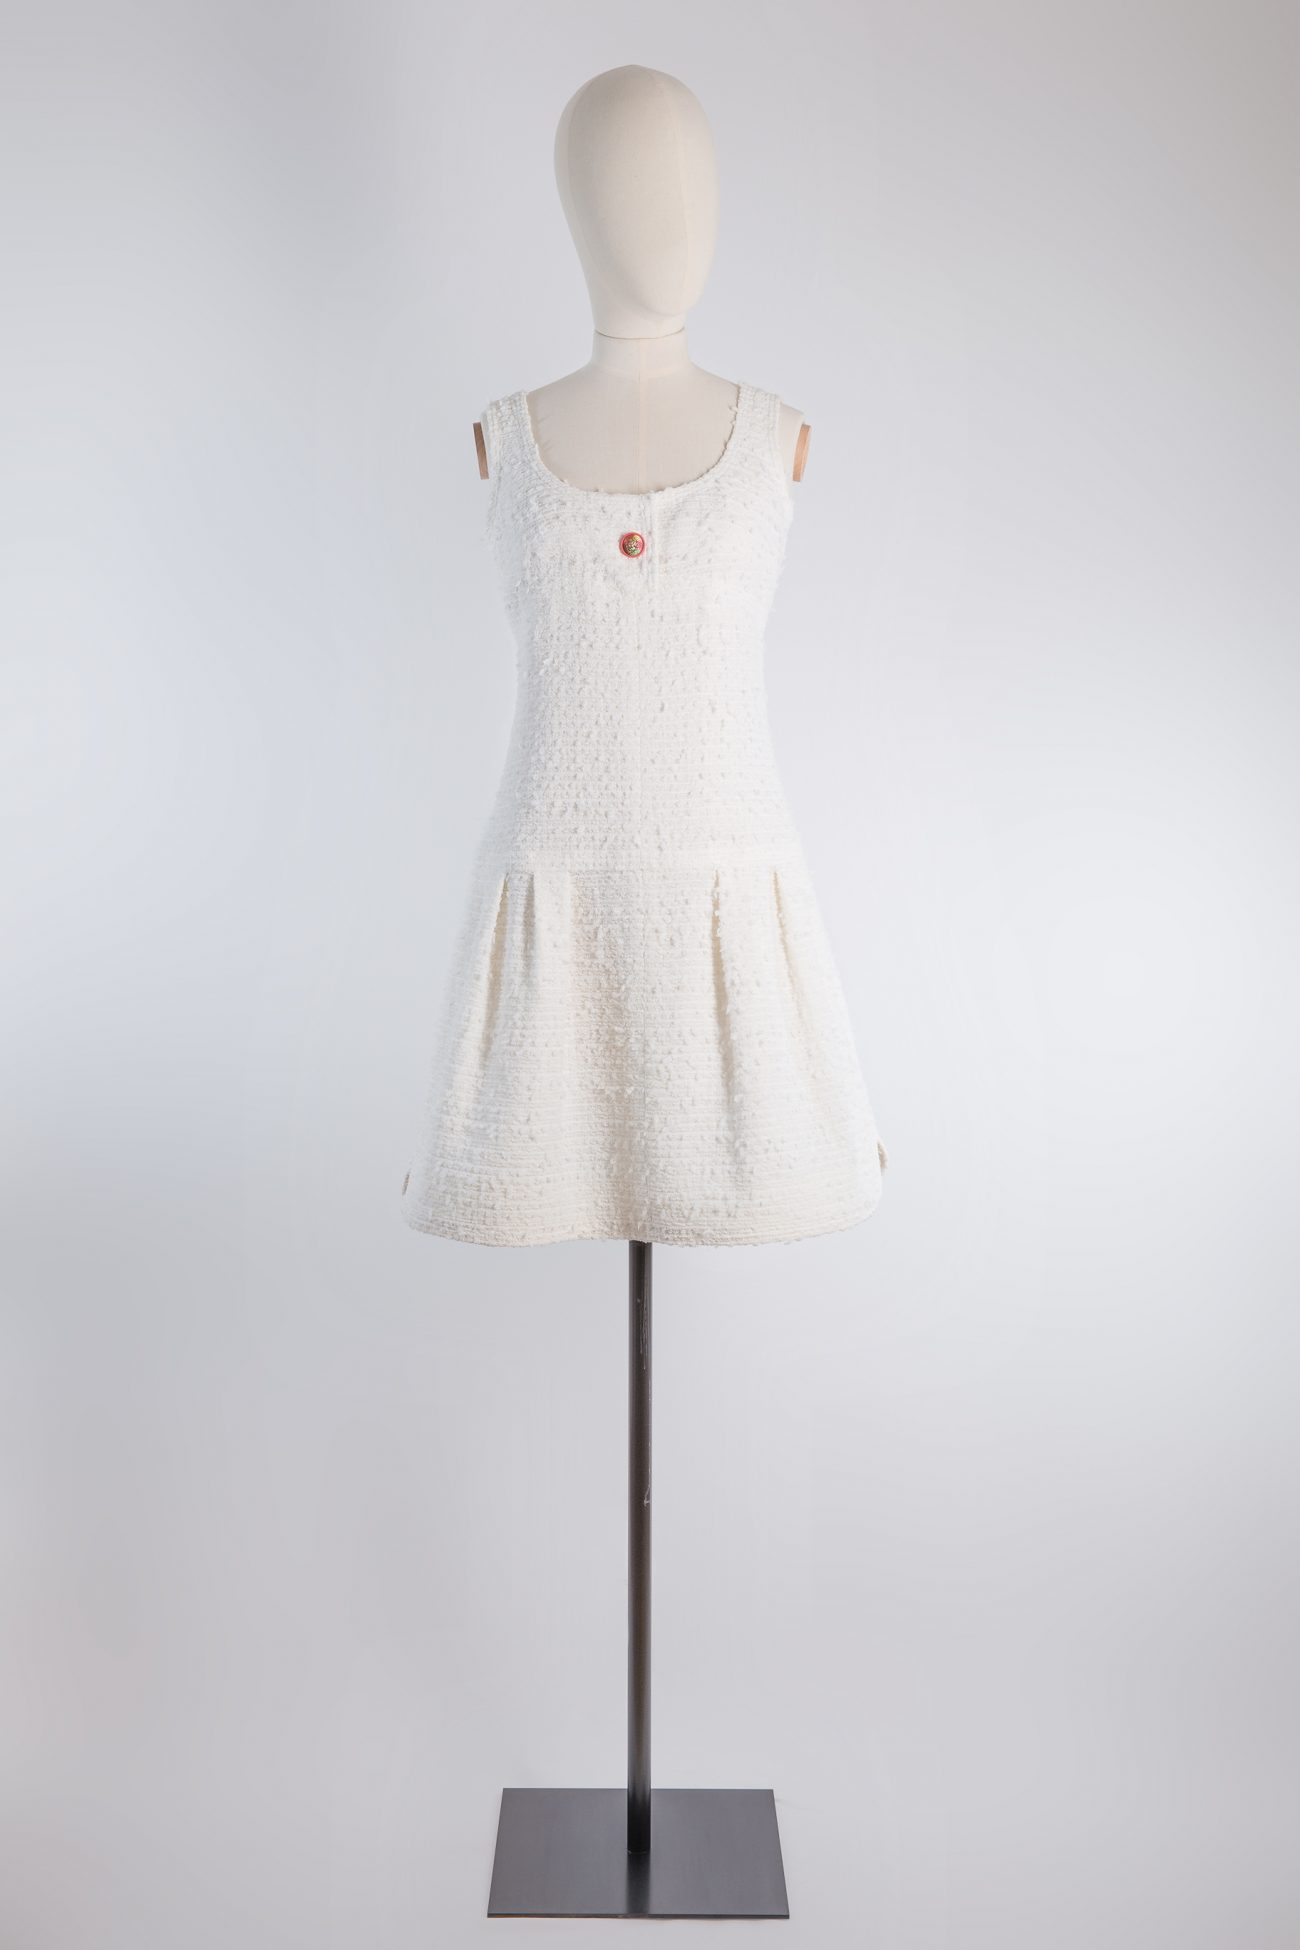 Chanel Tweed Dress, FR36 - Huntessa Luxury Online Consignment Boutique